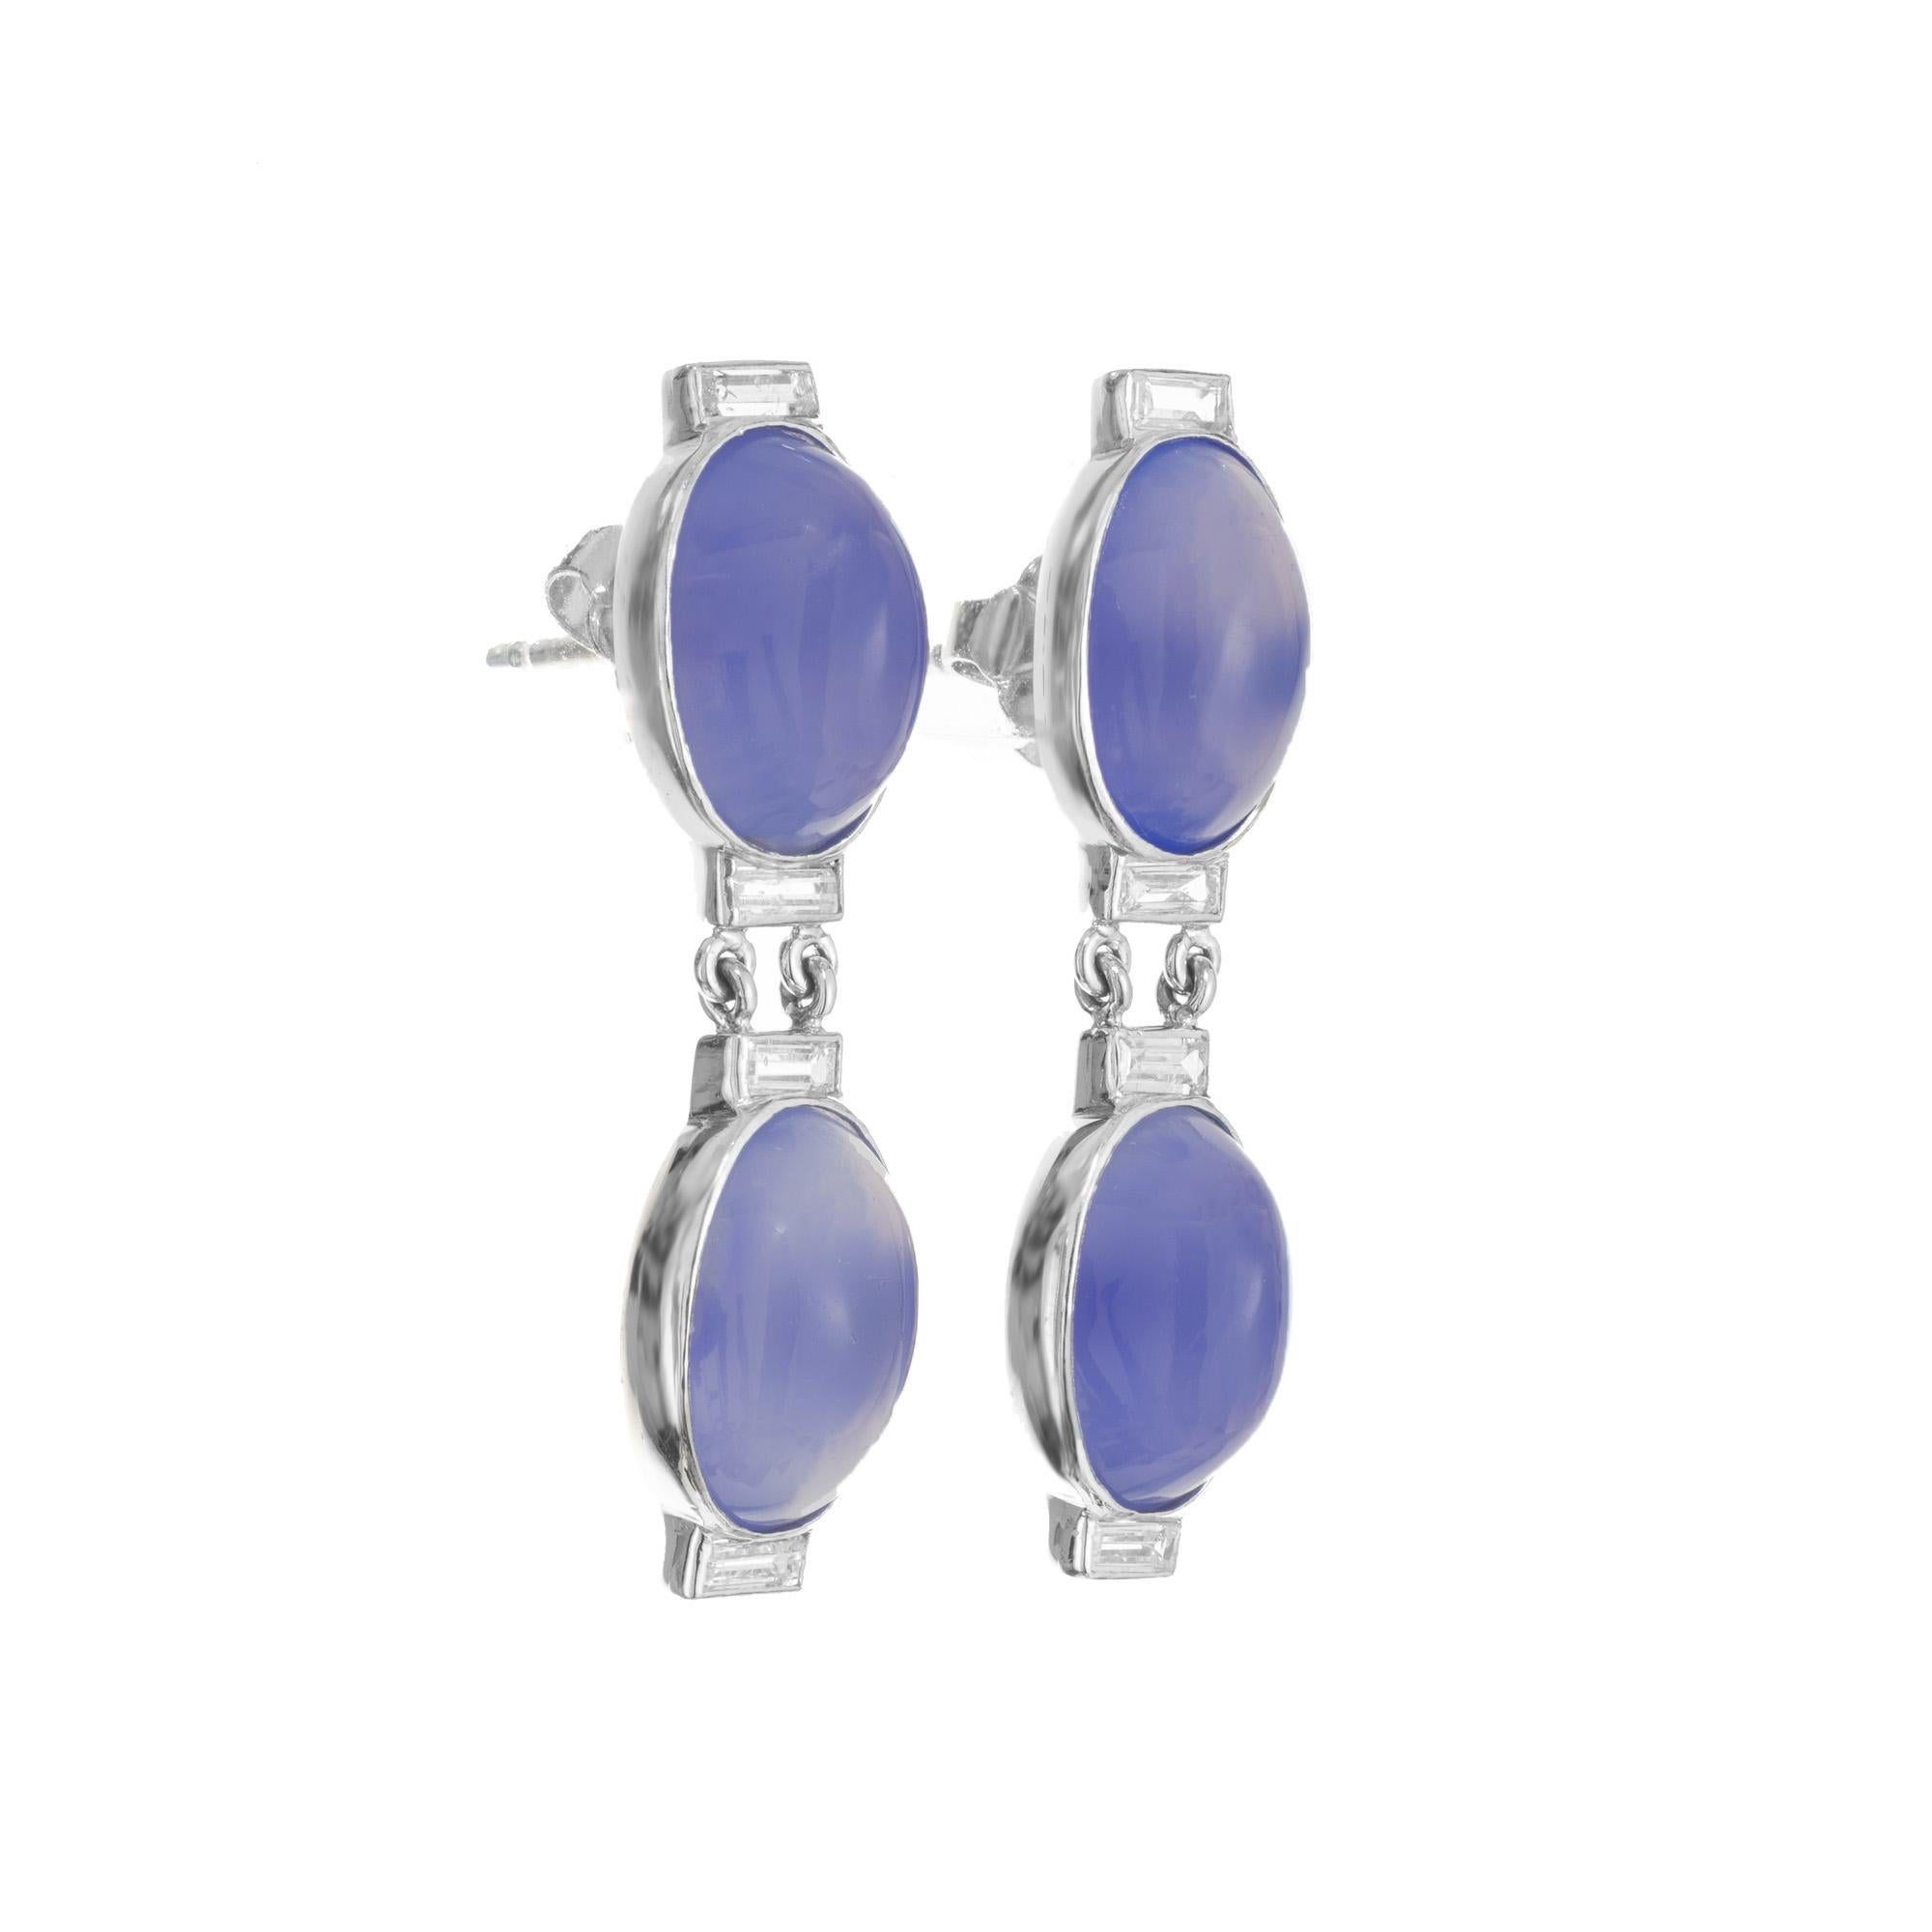 Artisanal Late Art Deco Chalcedony and diamond dangle earrings. Four natural oval cabochon light to medium blue Chalcedony set in platinum bezel frames. Each section is spaced by baguette diamonds. The Chalcedony have unique color zoning on each